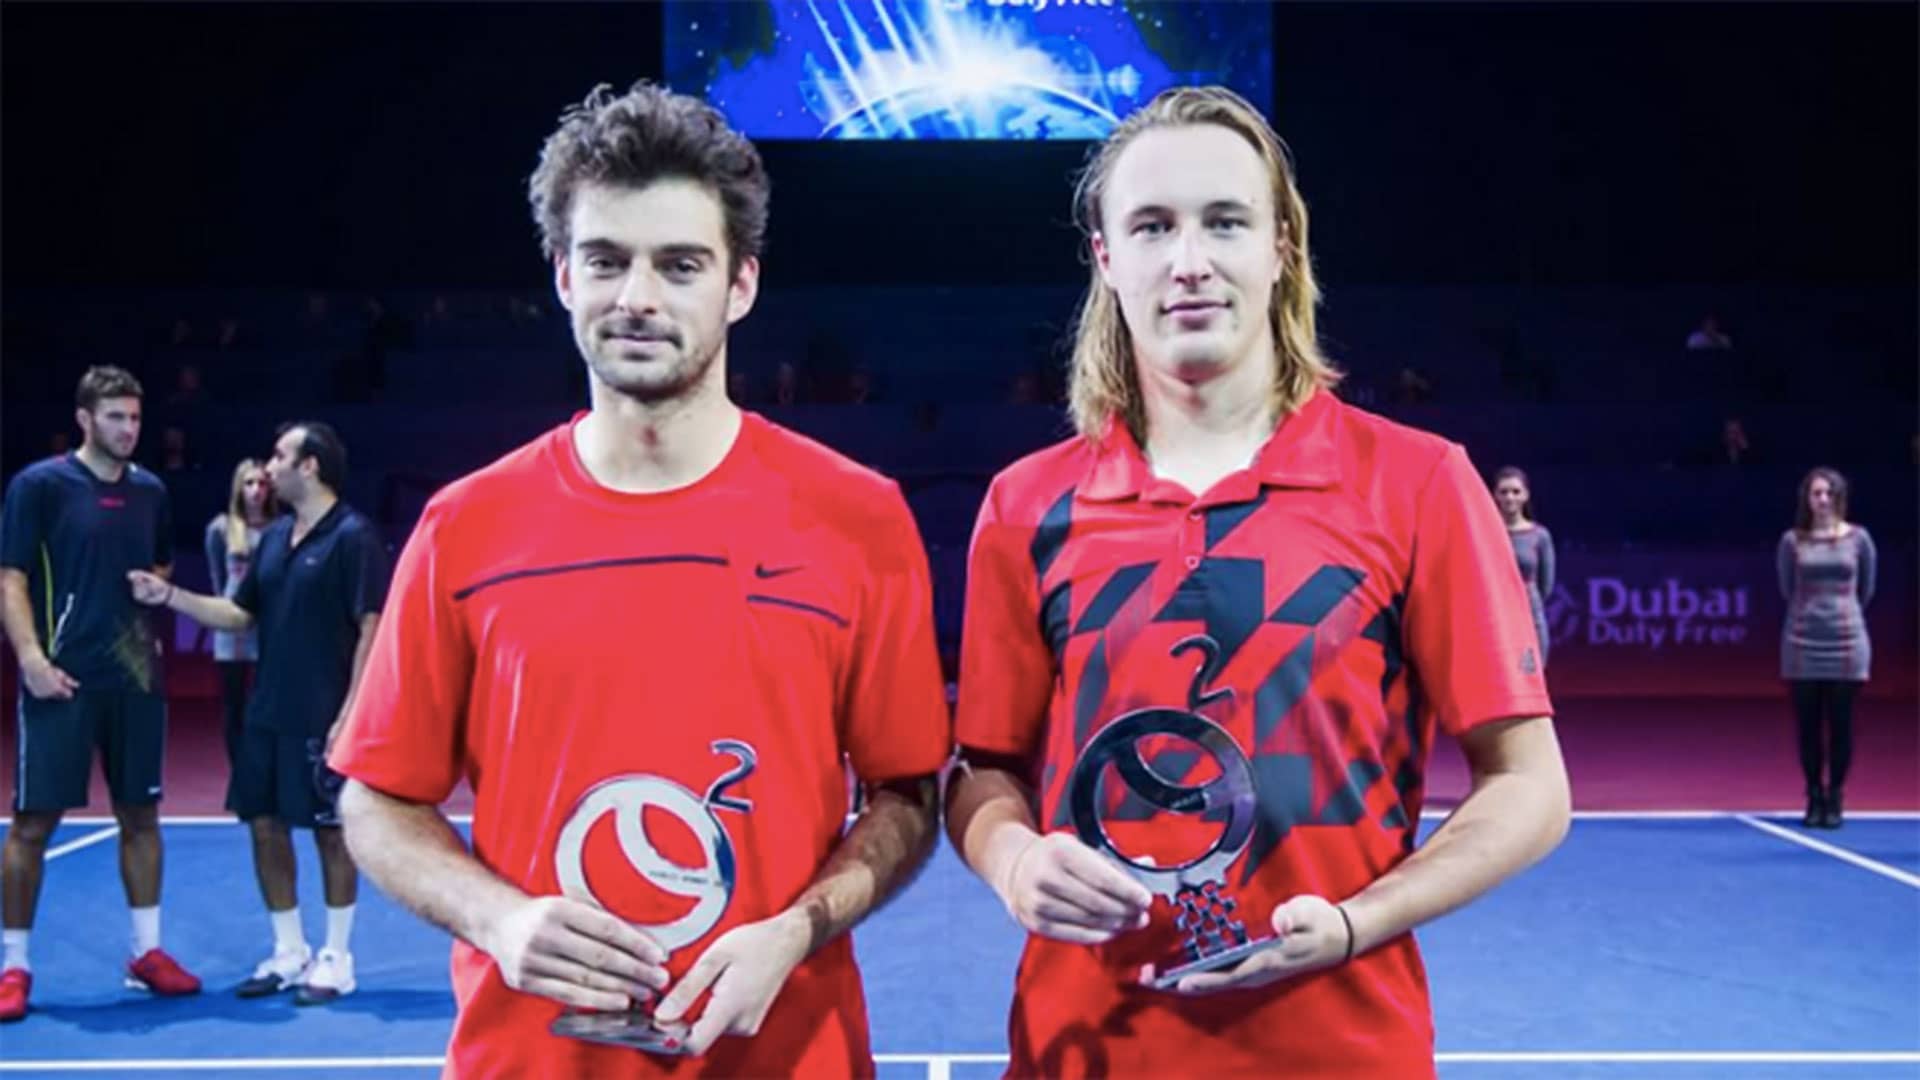 Marin Draganja and Henri Kontinen won their first team title together on Sunday in Zagreb.